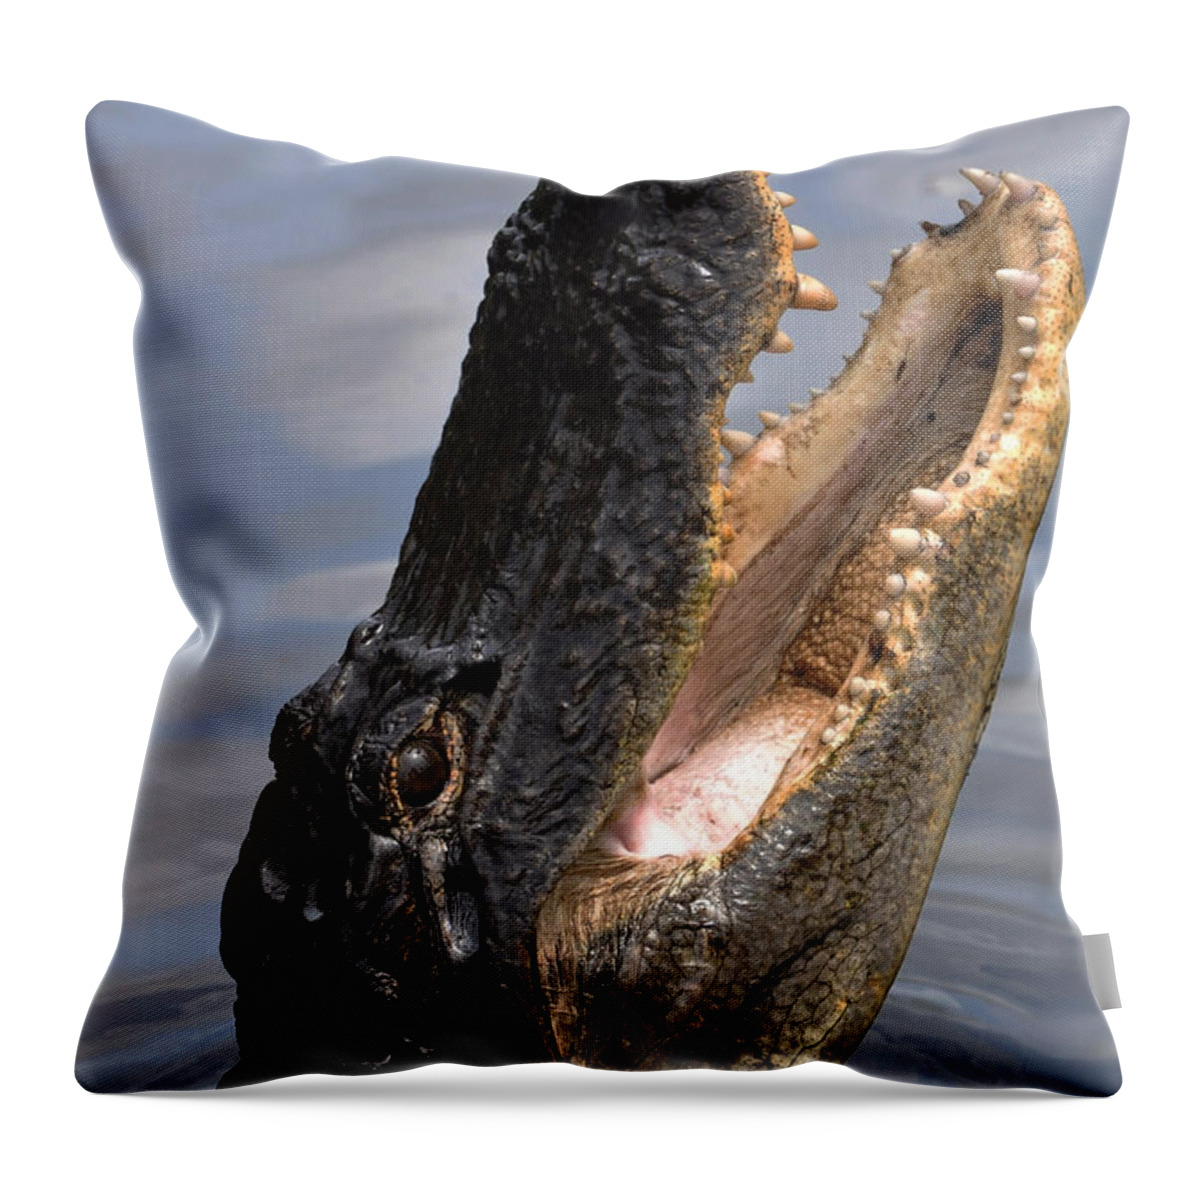 Alligator Throw Pillow featuring the photograph Alligator Head by Mary Beth Angelo